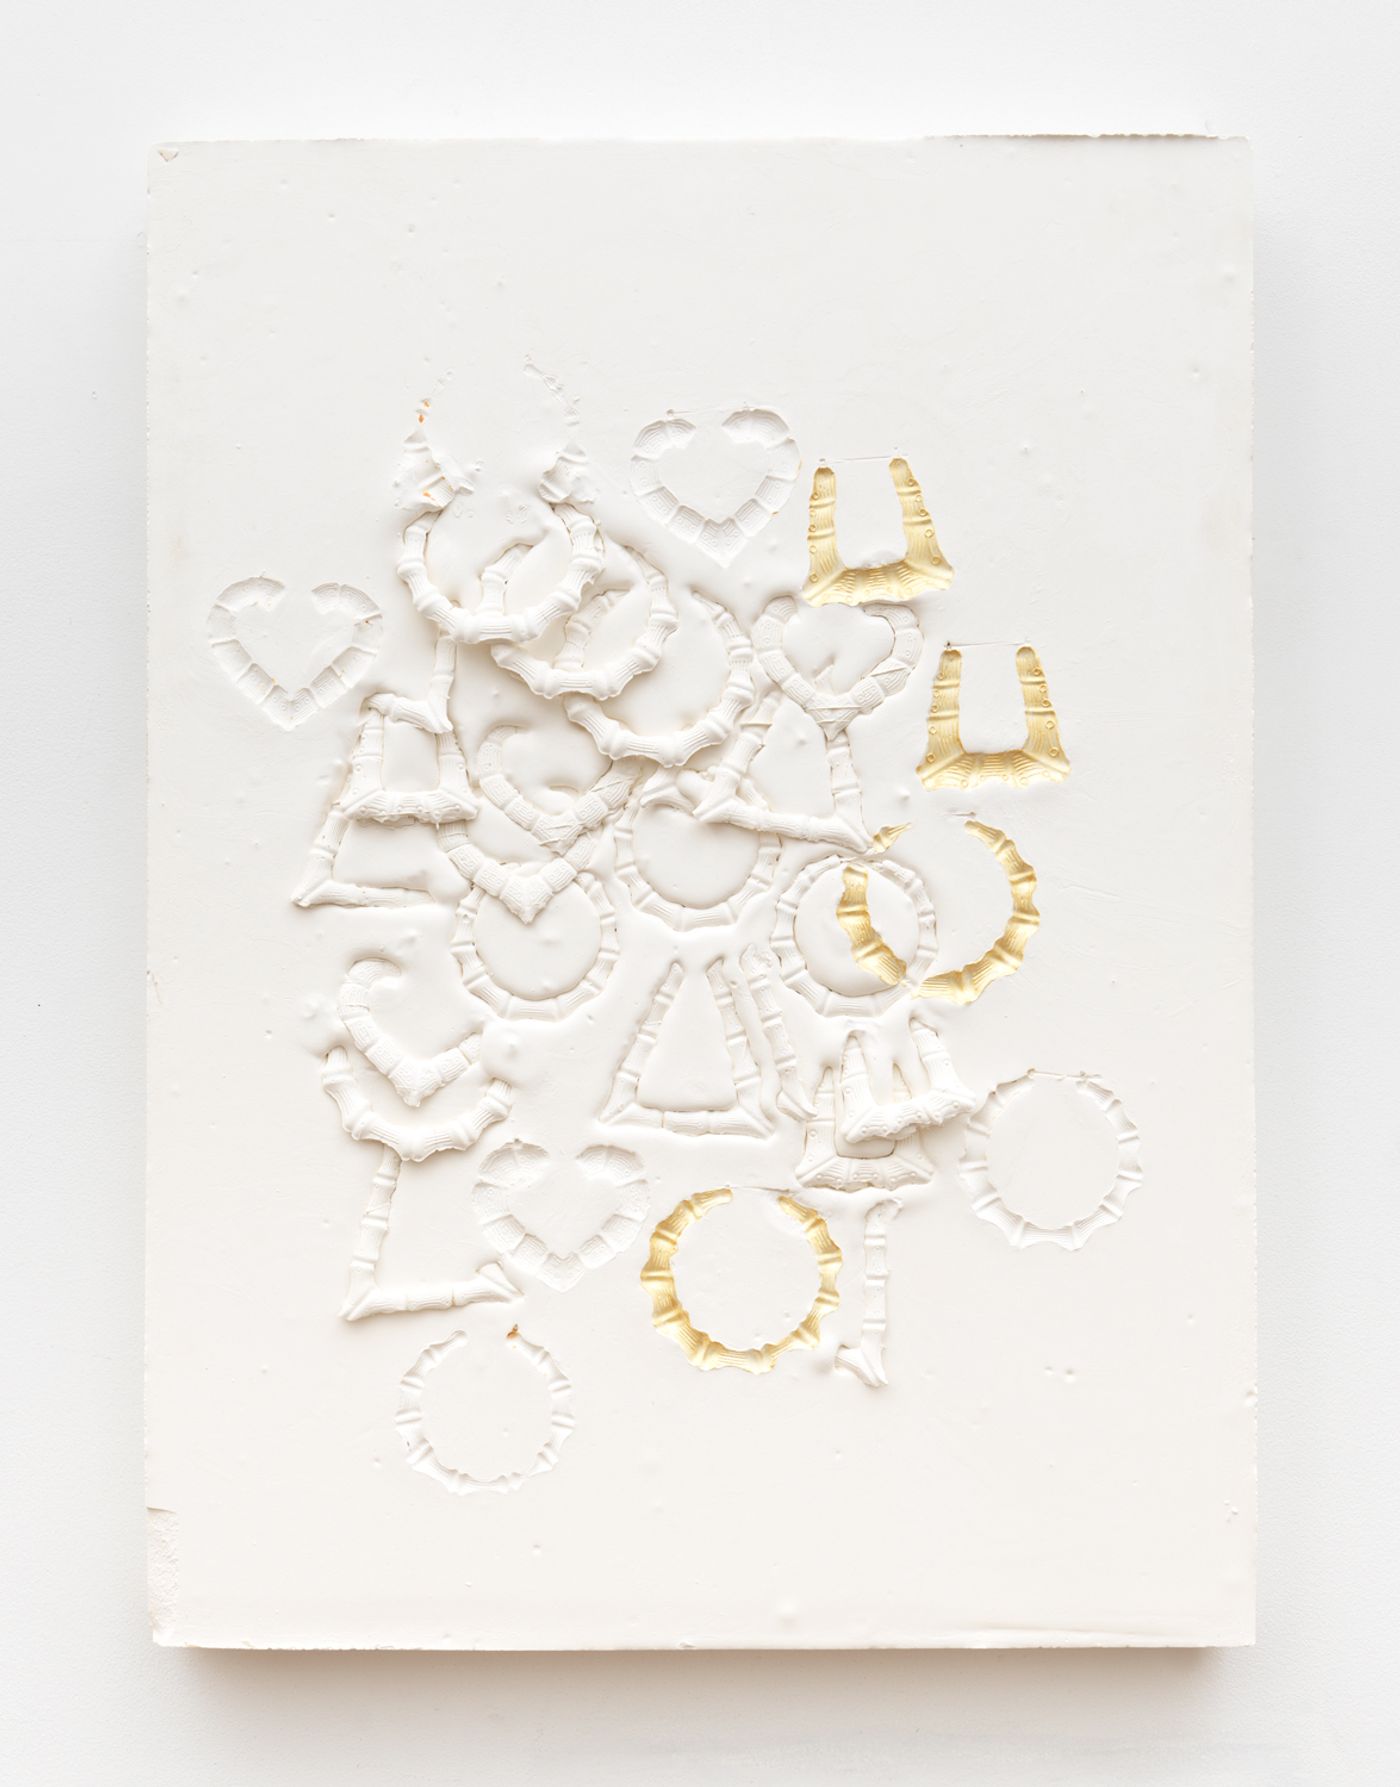 Image of Composition with round earrings, heart earrings and bamboo earrings, 2019: Plaster and acrylic